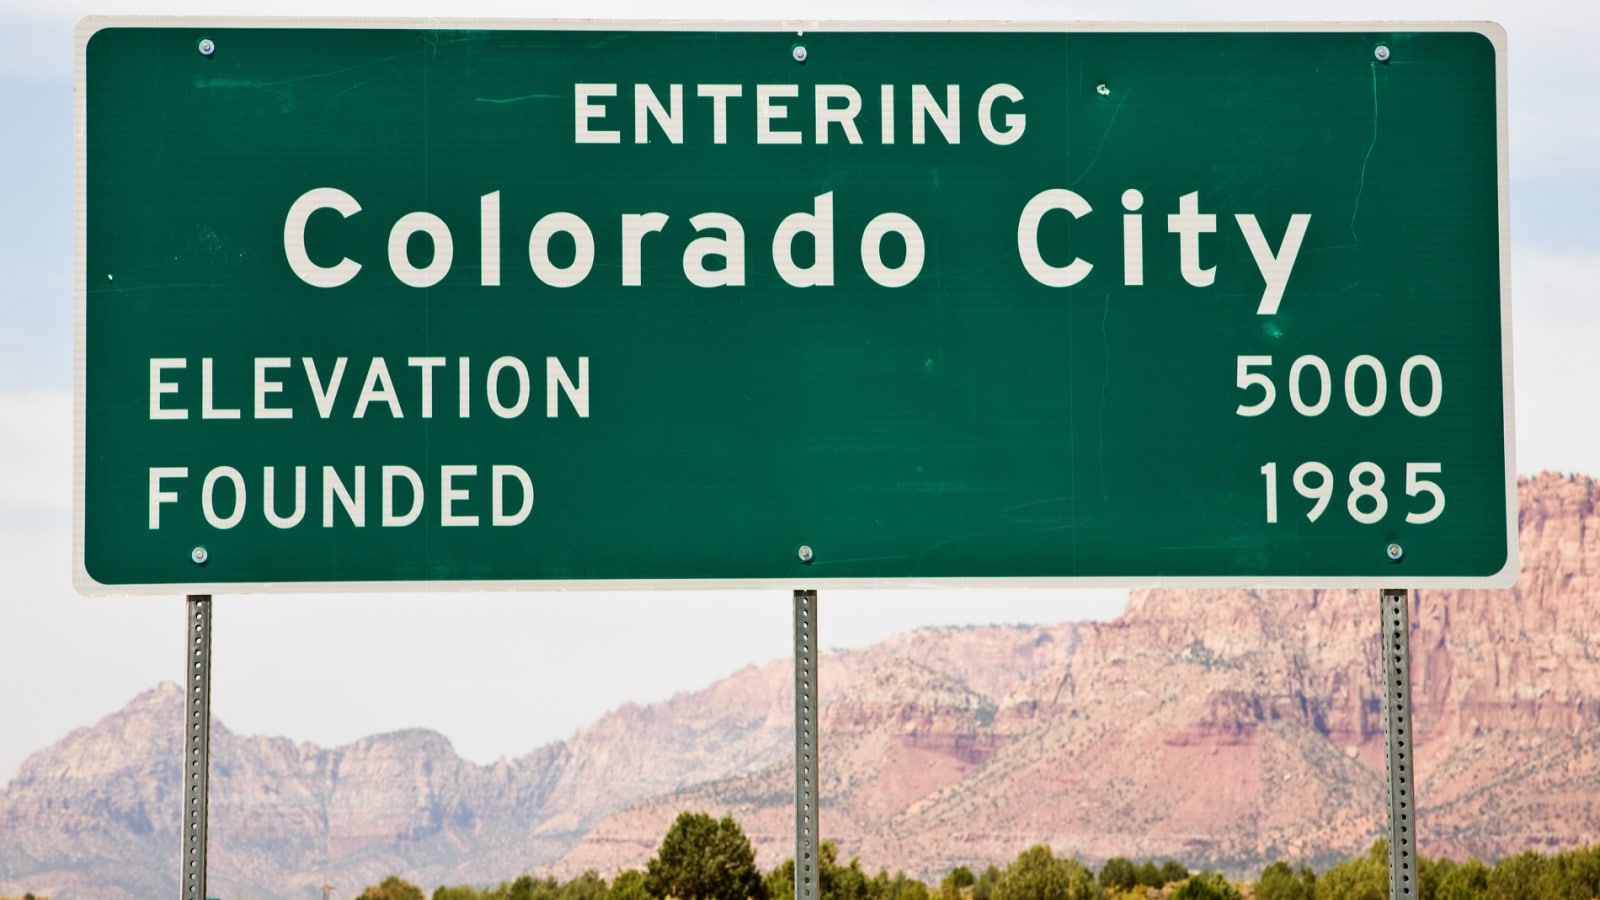 Colorado City City Limits Sign Founded by members of the Fundamentalist Church of Jesus Christ of Latter Day Saints